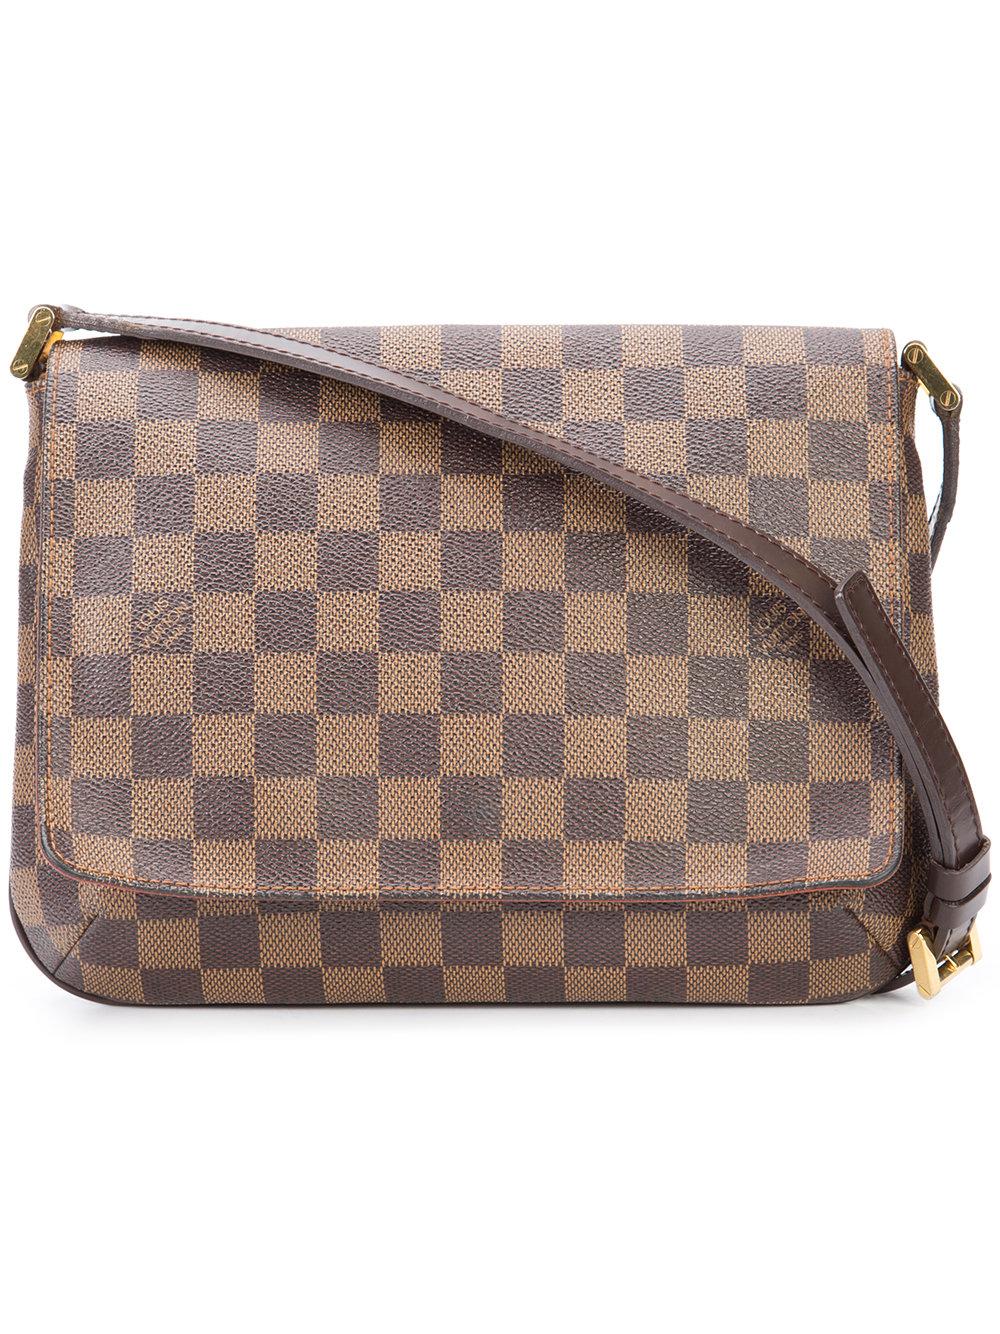 Lyst - Louis Vuitton Checked Crossbody Bag in Brown